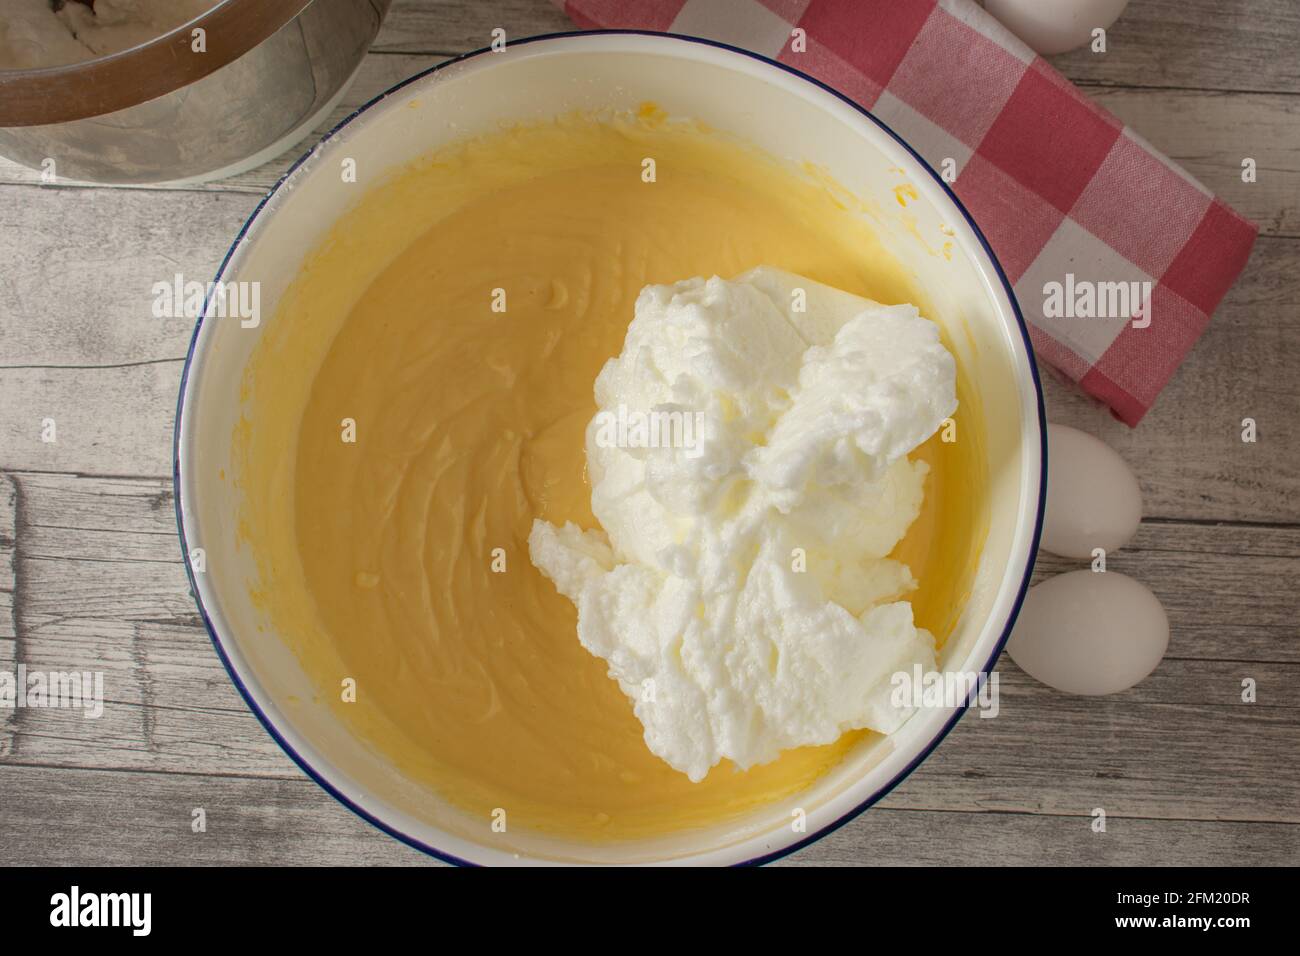 Fresh stirred cake batter with whipped egg white in a bowl on rustic wooden table background. Overhead view Stock Photo